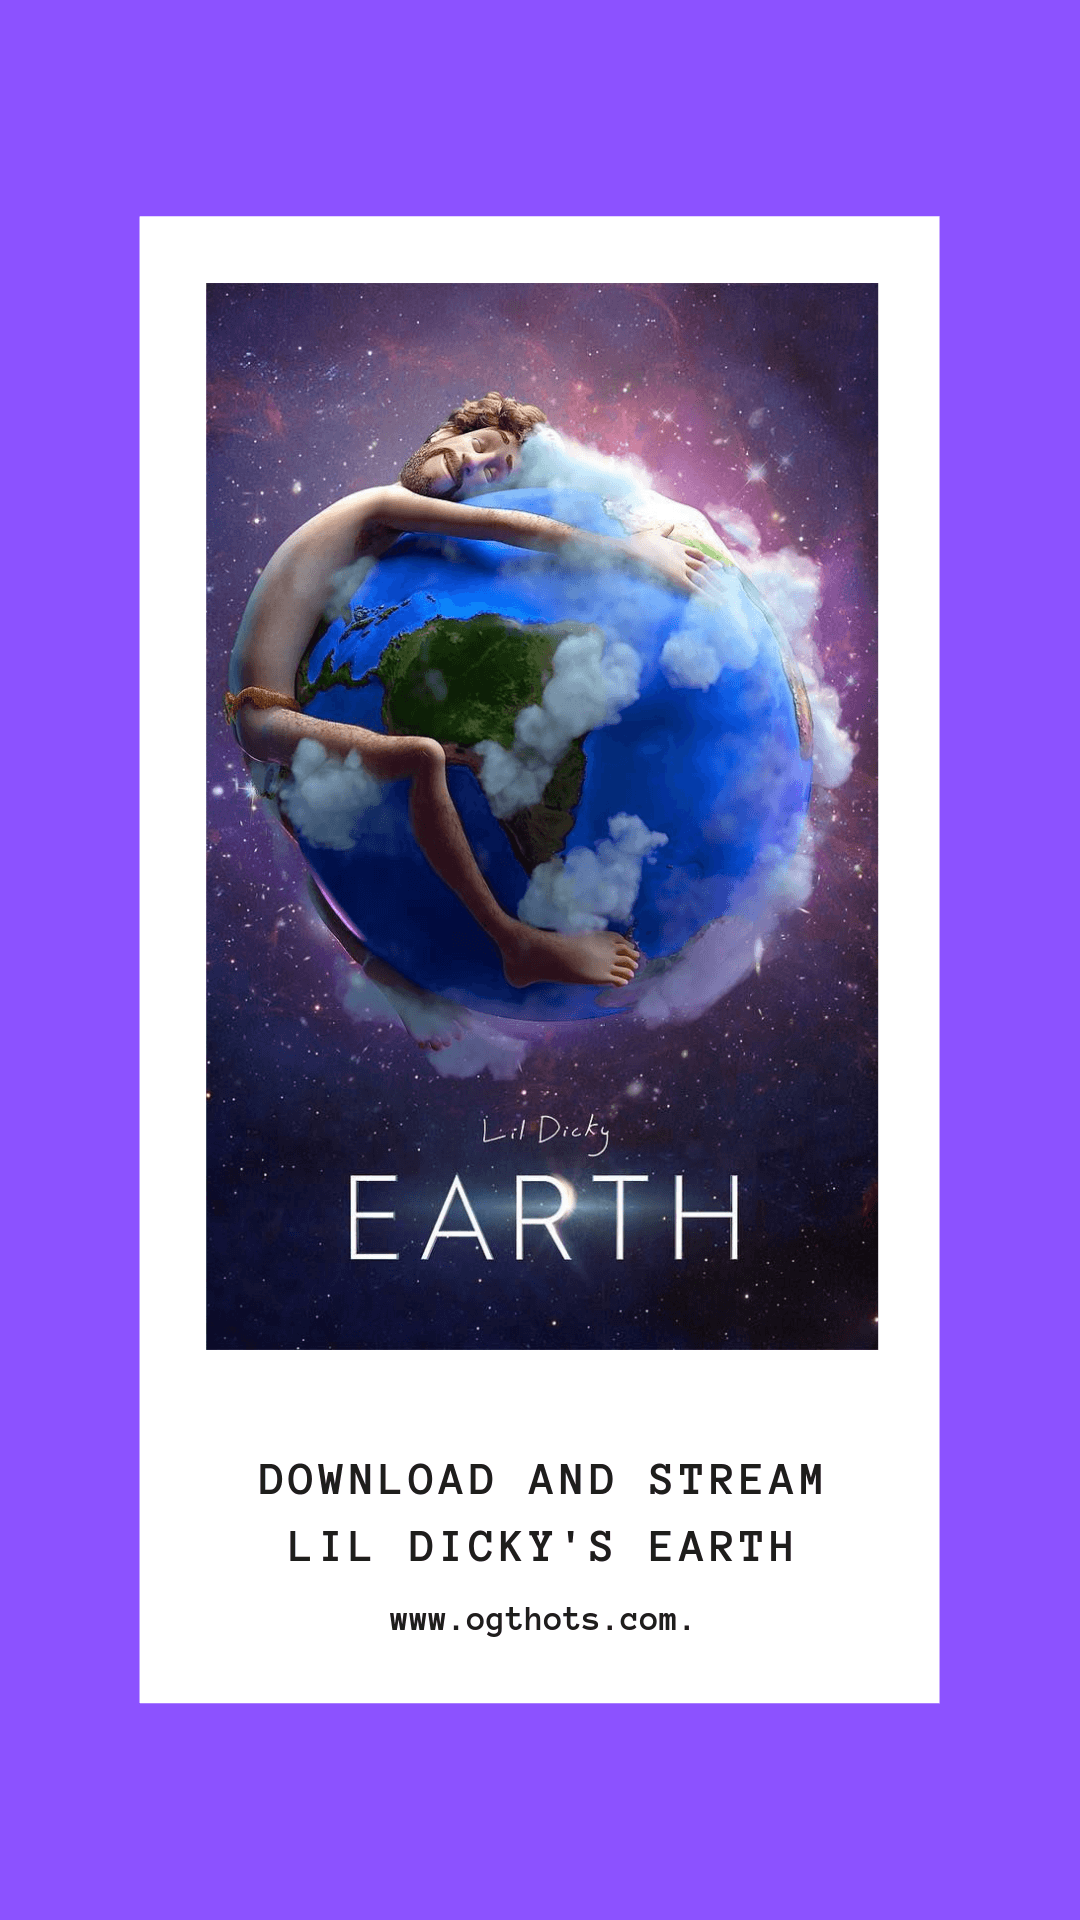 Lil Dicky Earth Download and Stream. Lil yachty, Earth